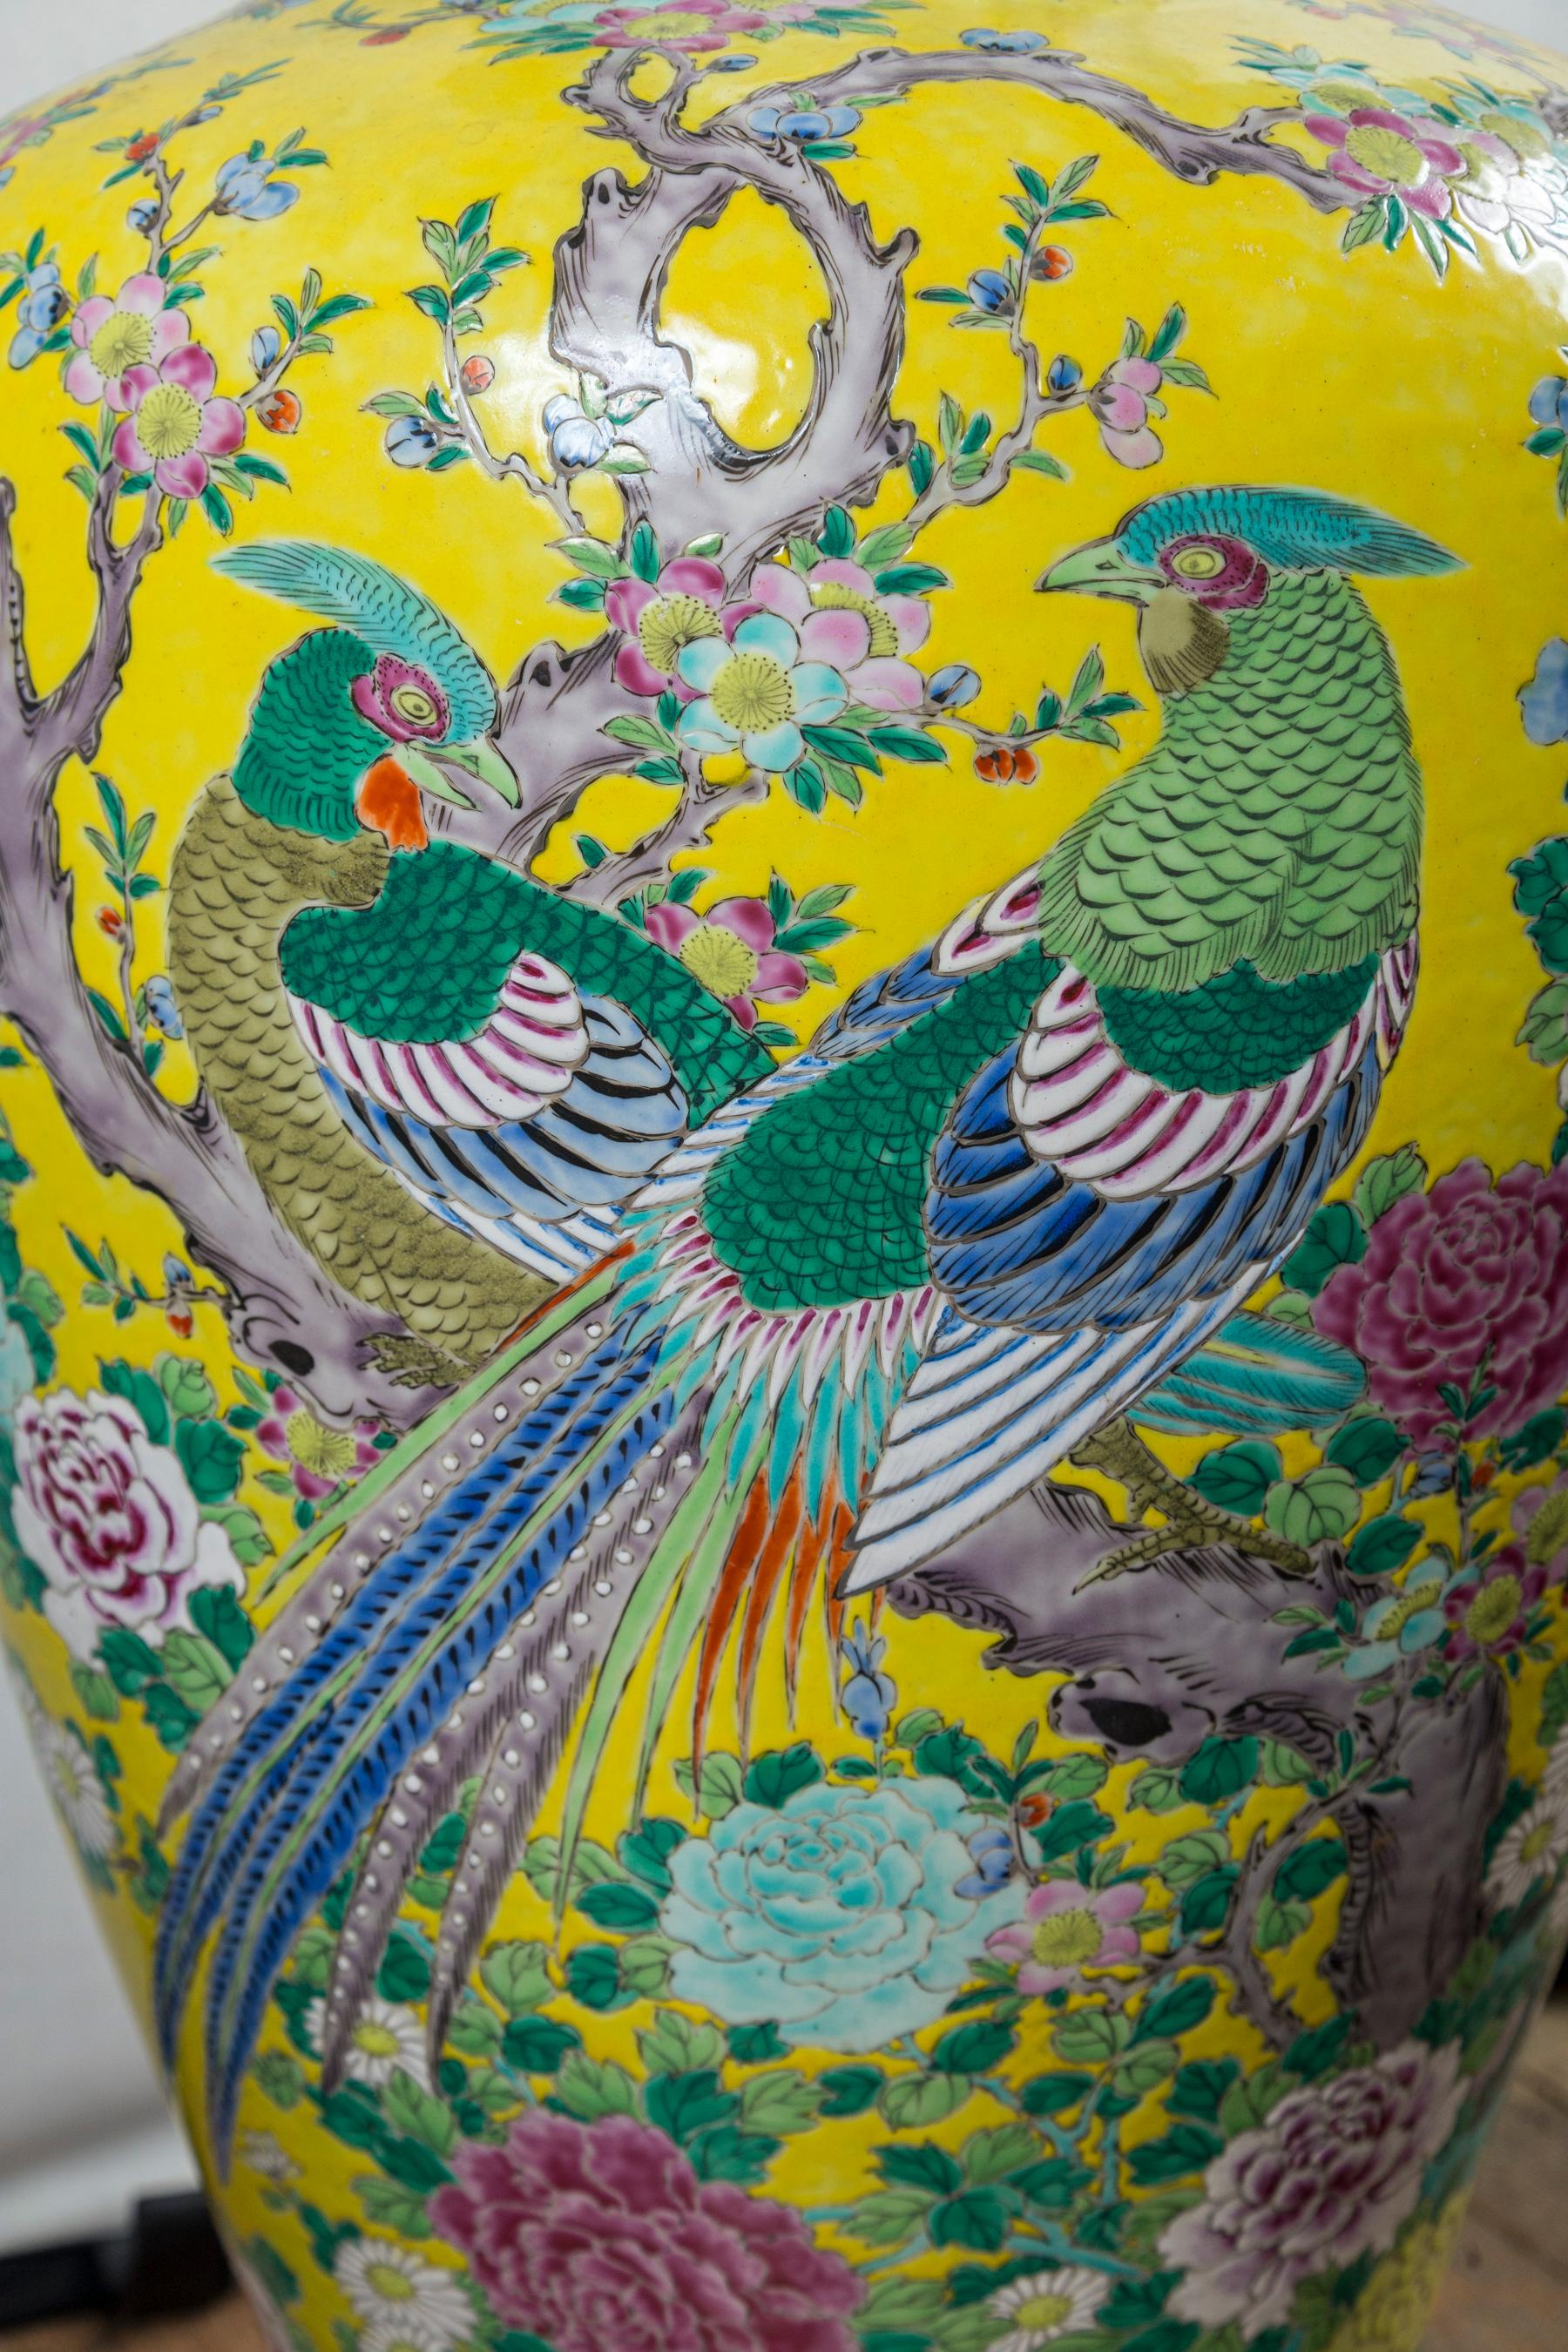 Bright yellow ground decorated with exotic birds and flowers. Dark blue and green bands also decorated. Bright white interior. Marked NIPPON on the underside. The flared open top is 8.75 across.